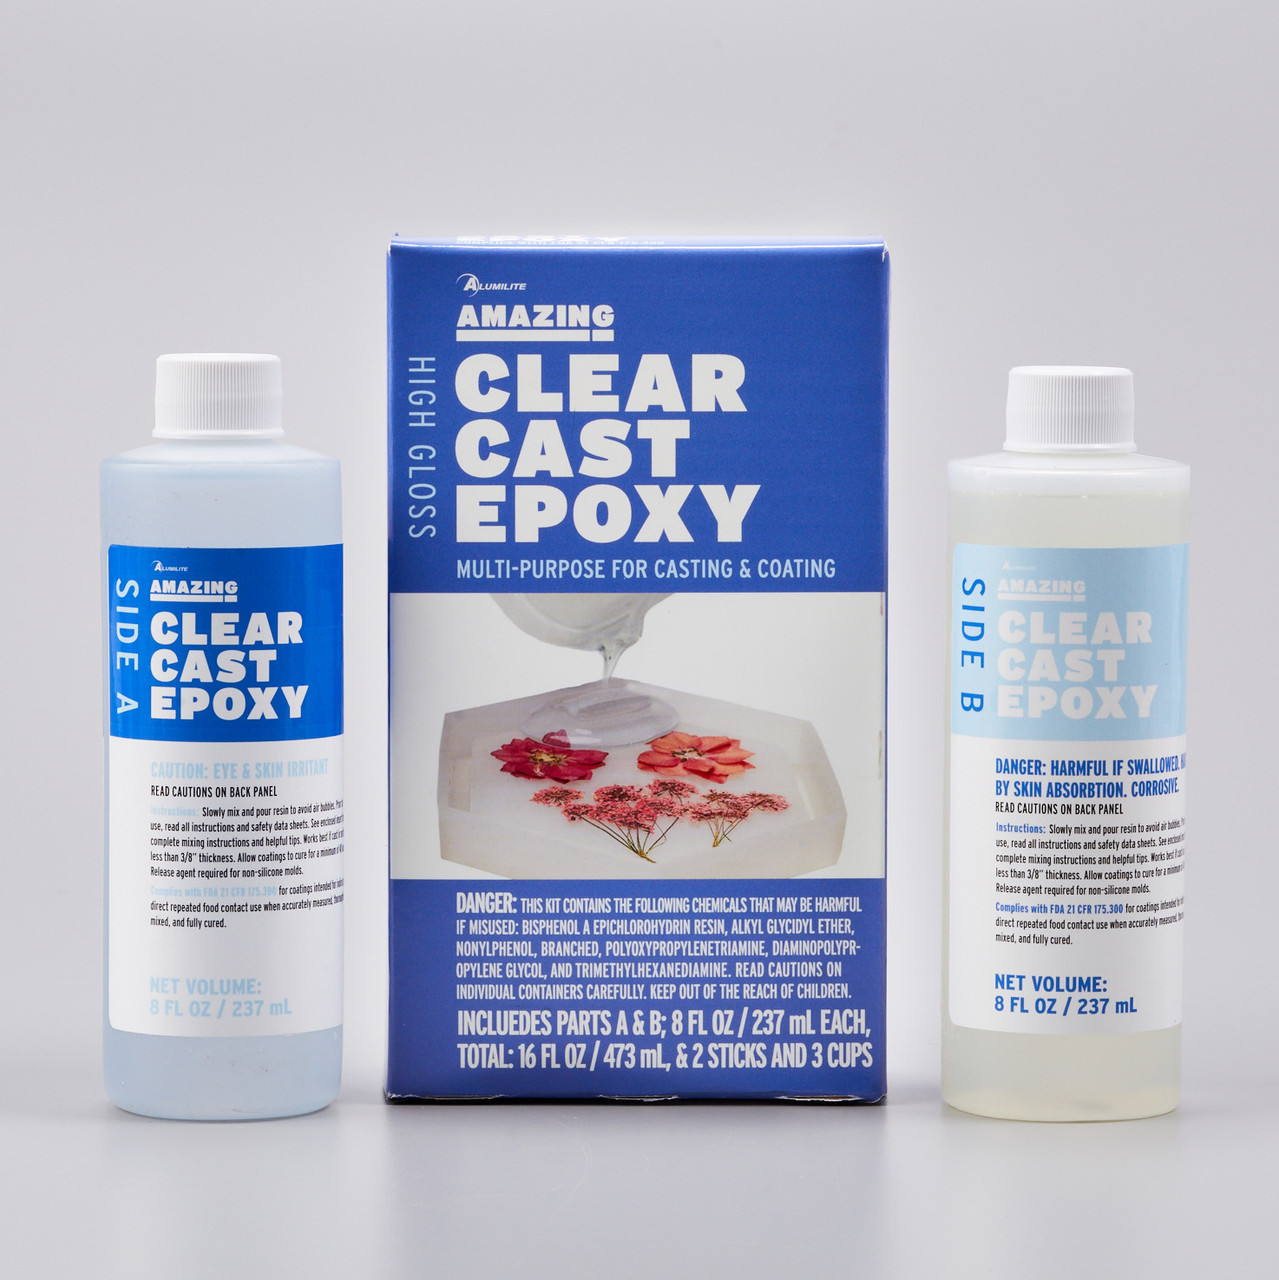 TotalBoat Thickset Deep Pour Clear Casting Epoxy Resin 8 Gallon Kit